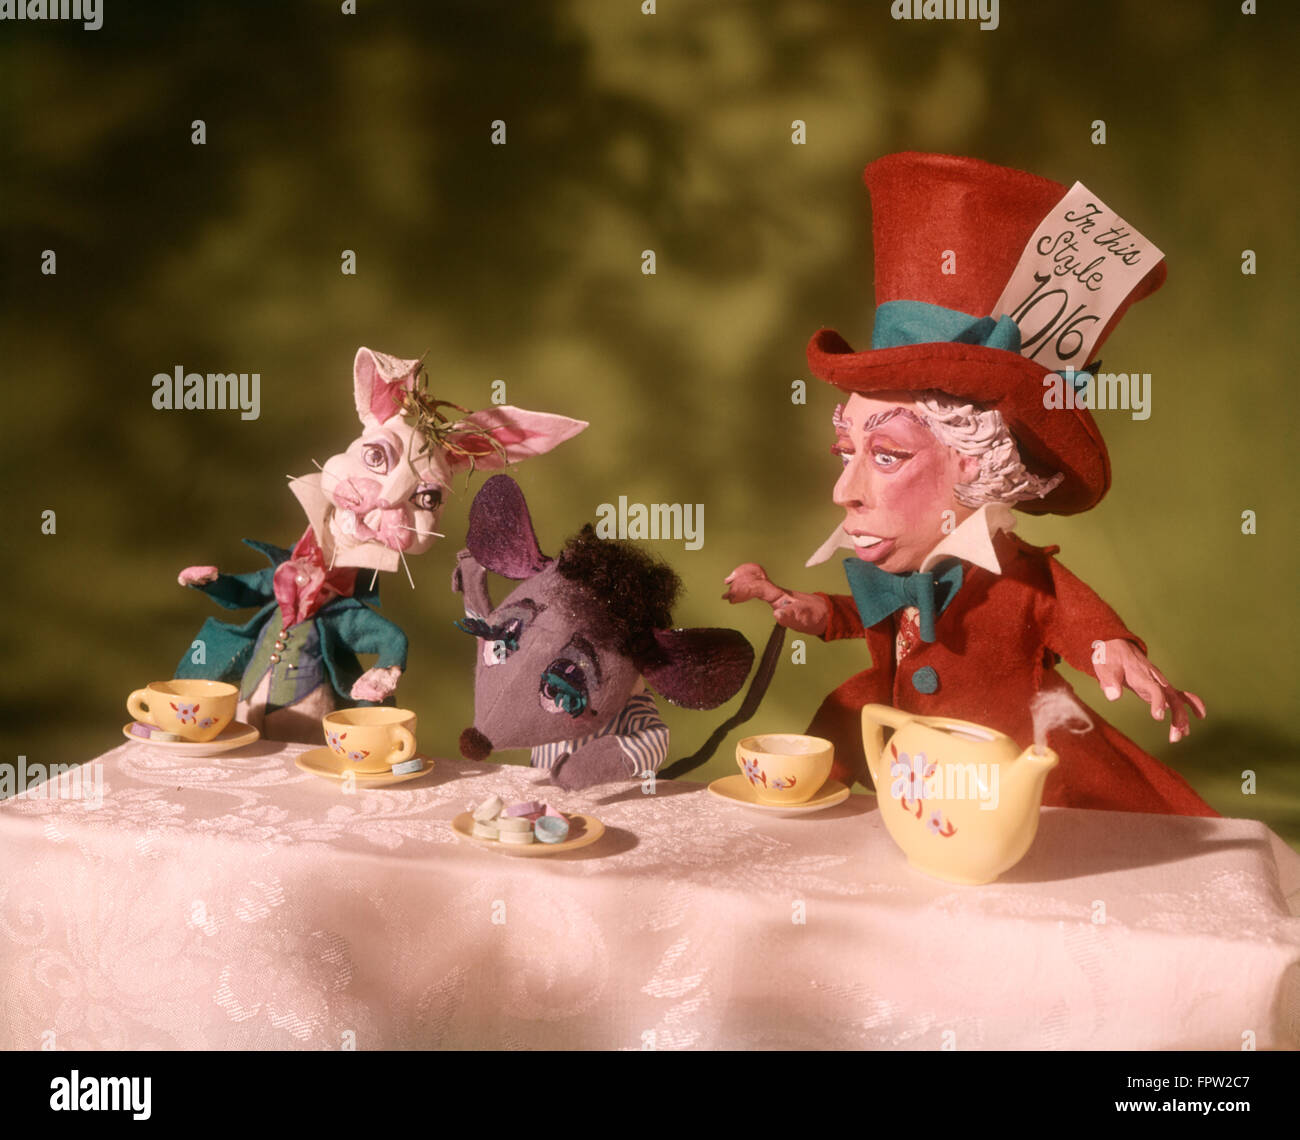 Mad Hatter S Tea Party From Alice In Wonderland Literary Characters Stock Photo Alamy